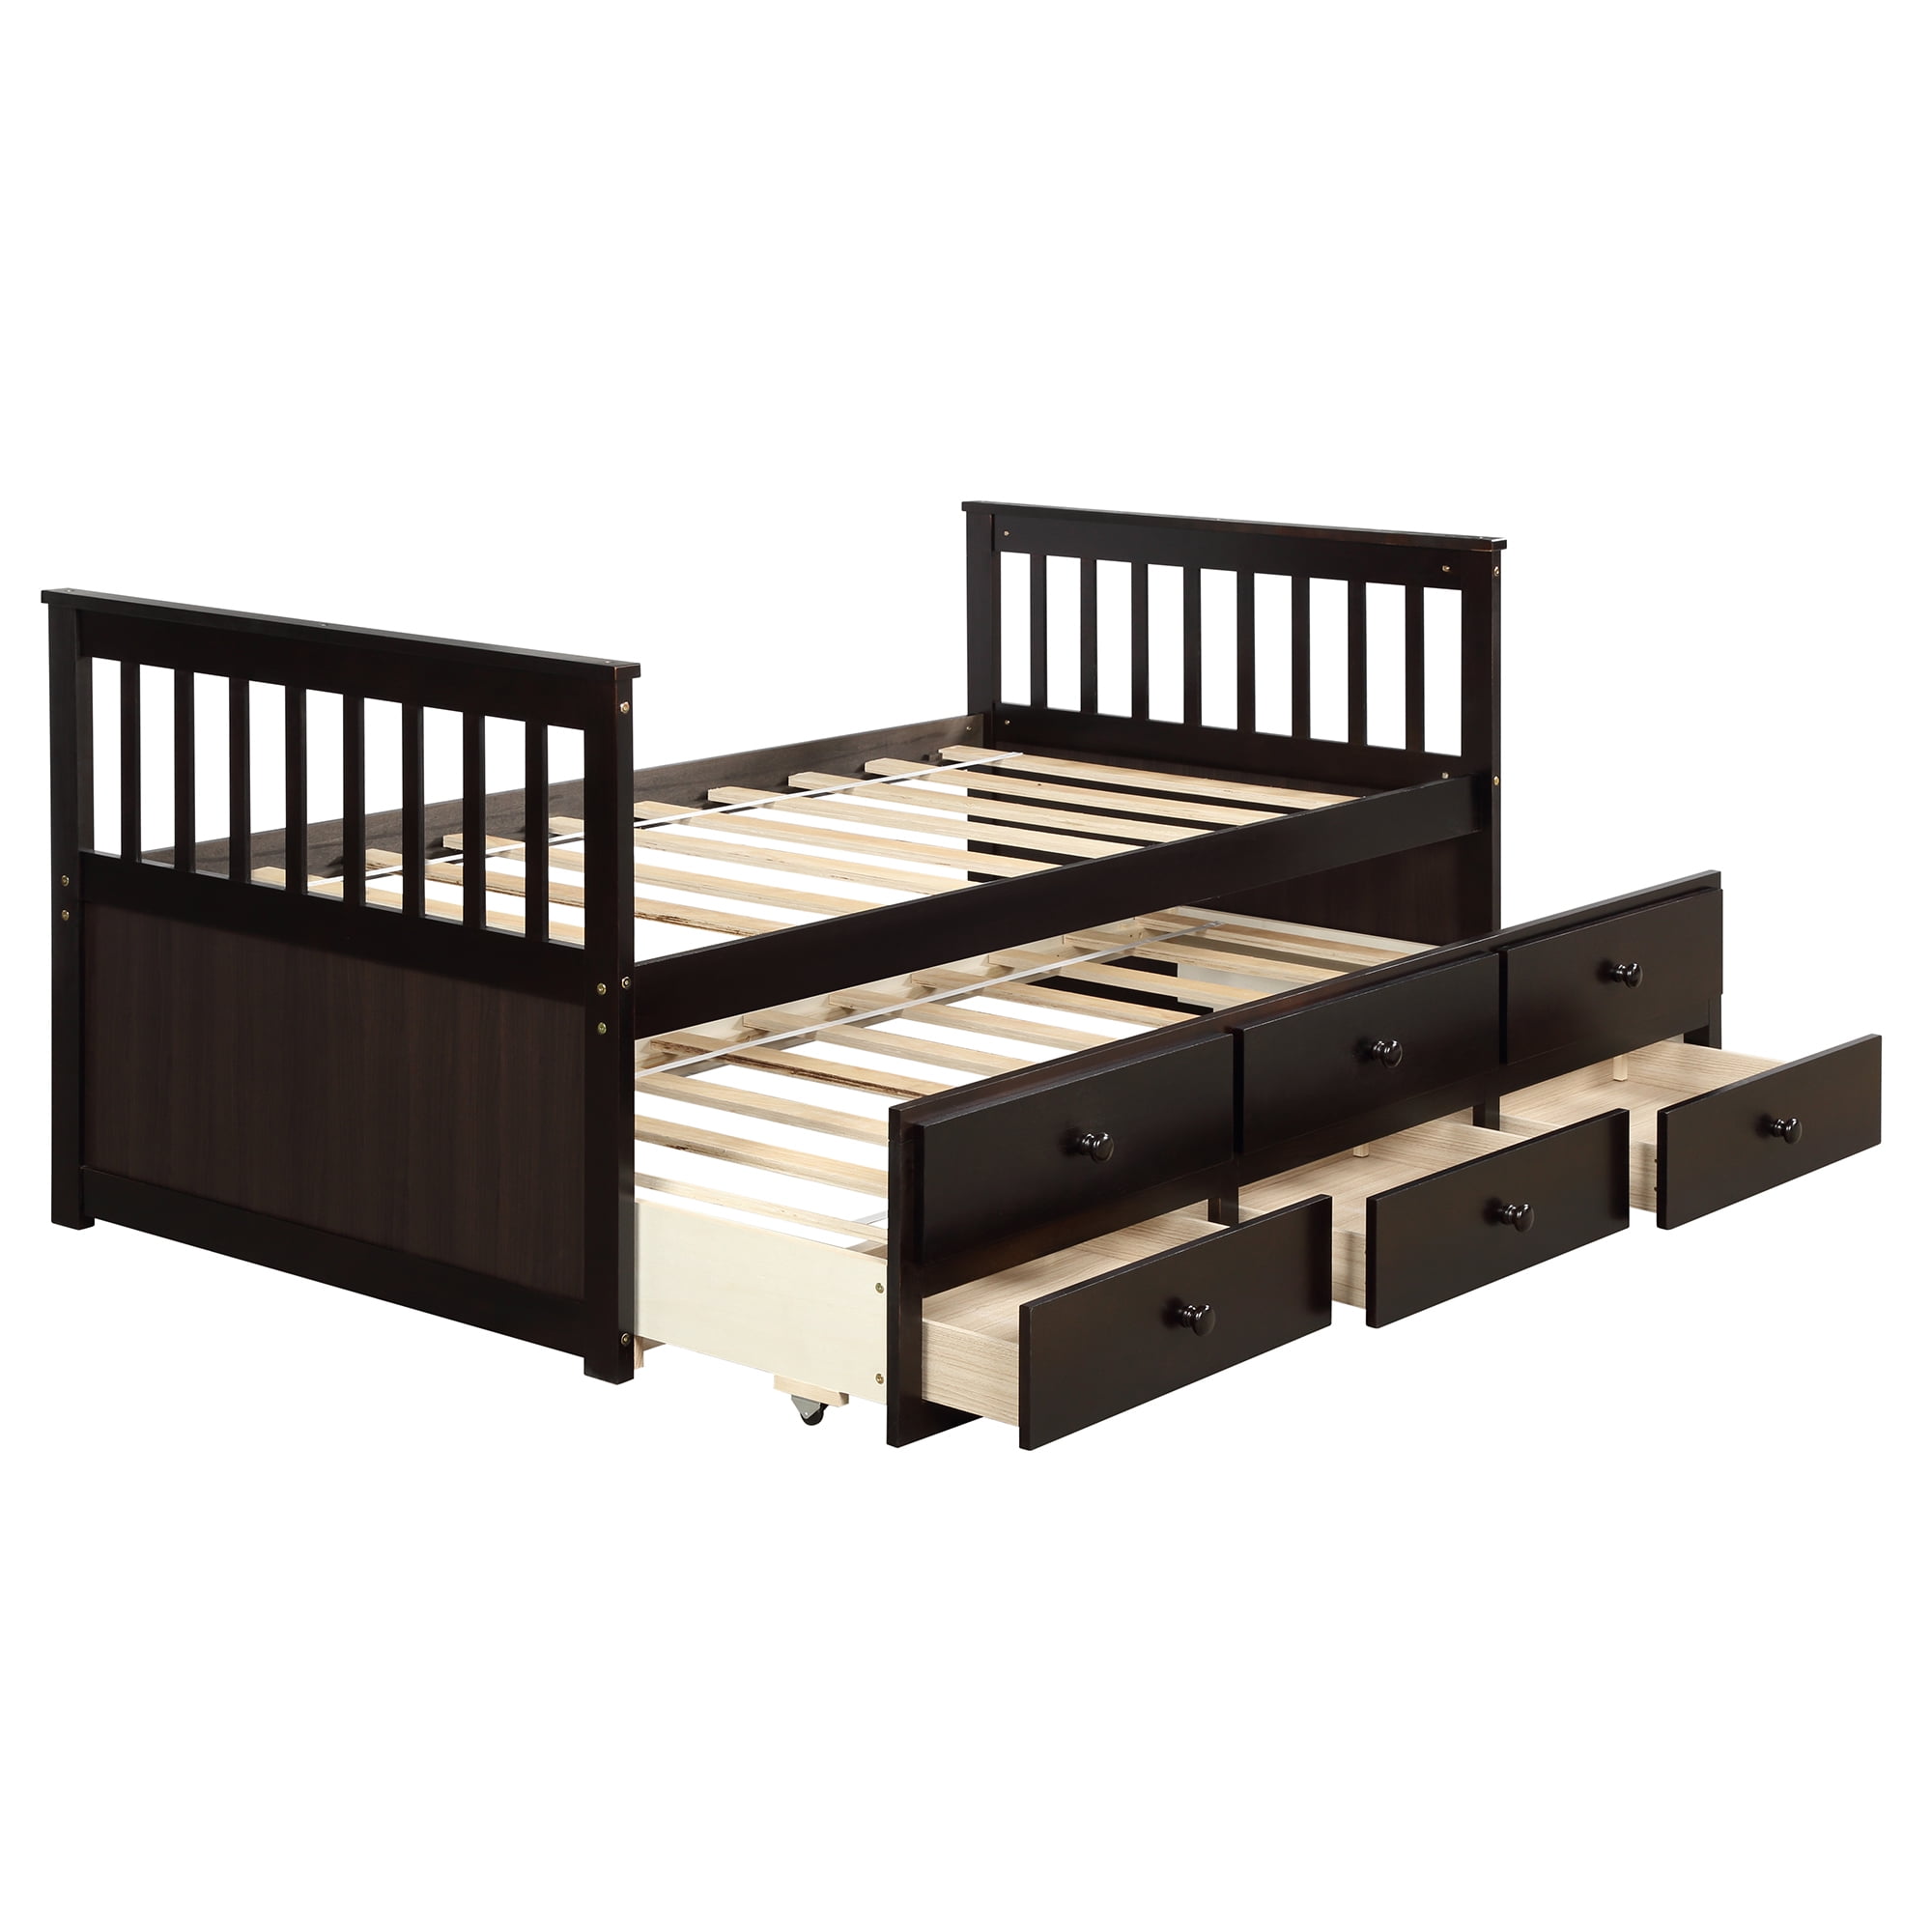 Details about   Twin Size Platform Storage Bed Bed Frame with 3 Drawers Daybed Captain USA STOCK 